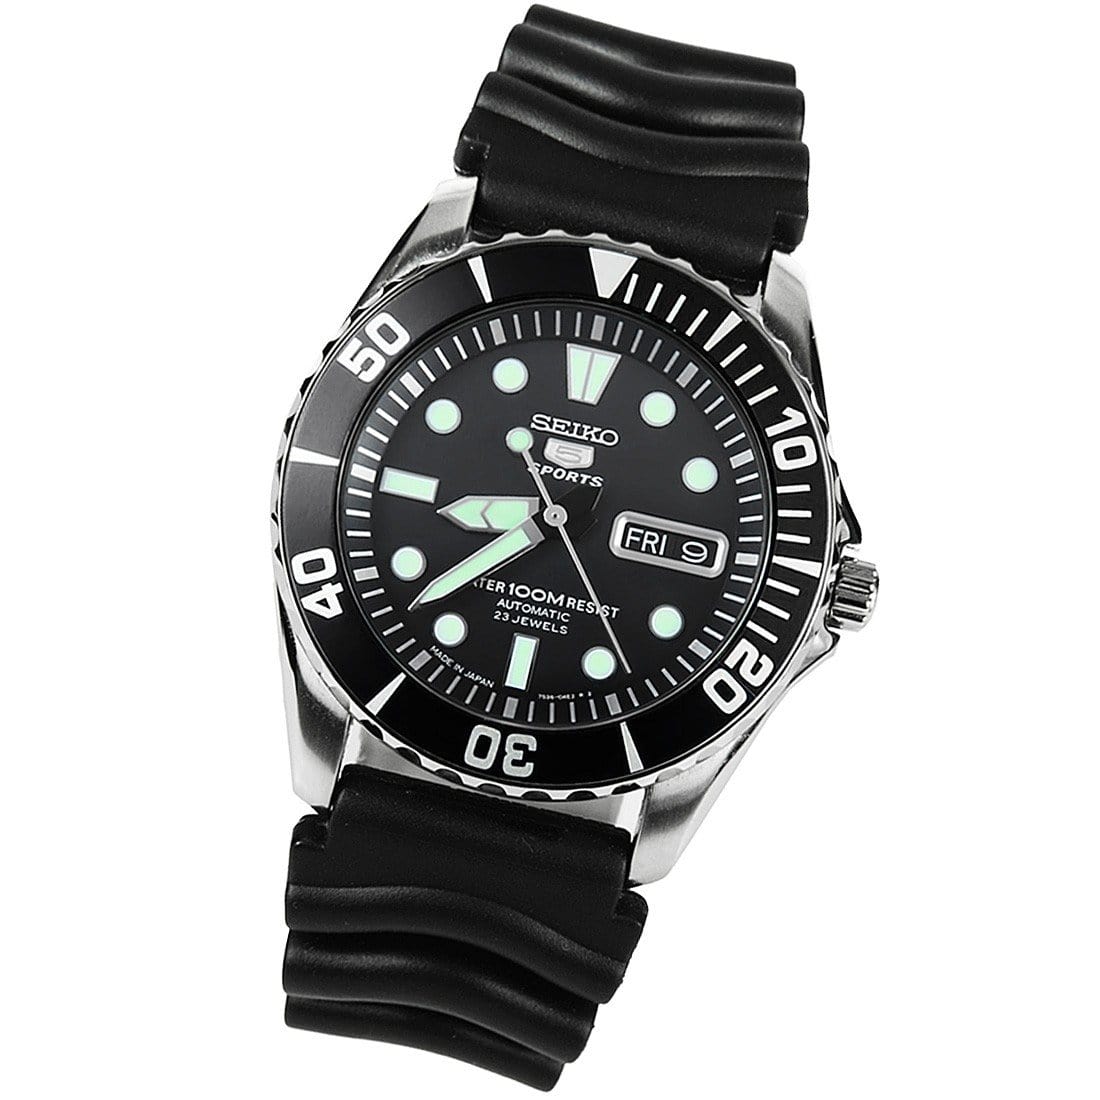 SNZF17J SNZF17J2 Seiko 5 Sports Automatic Watch with Extra Band